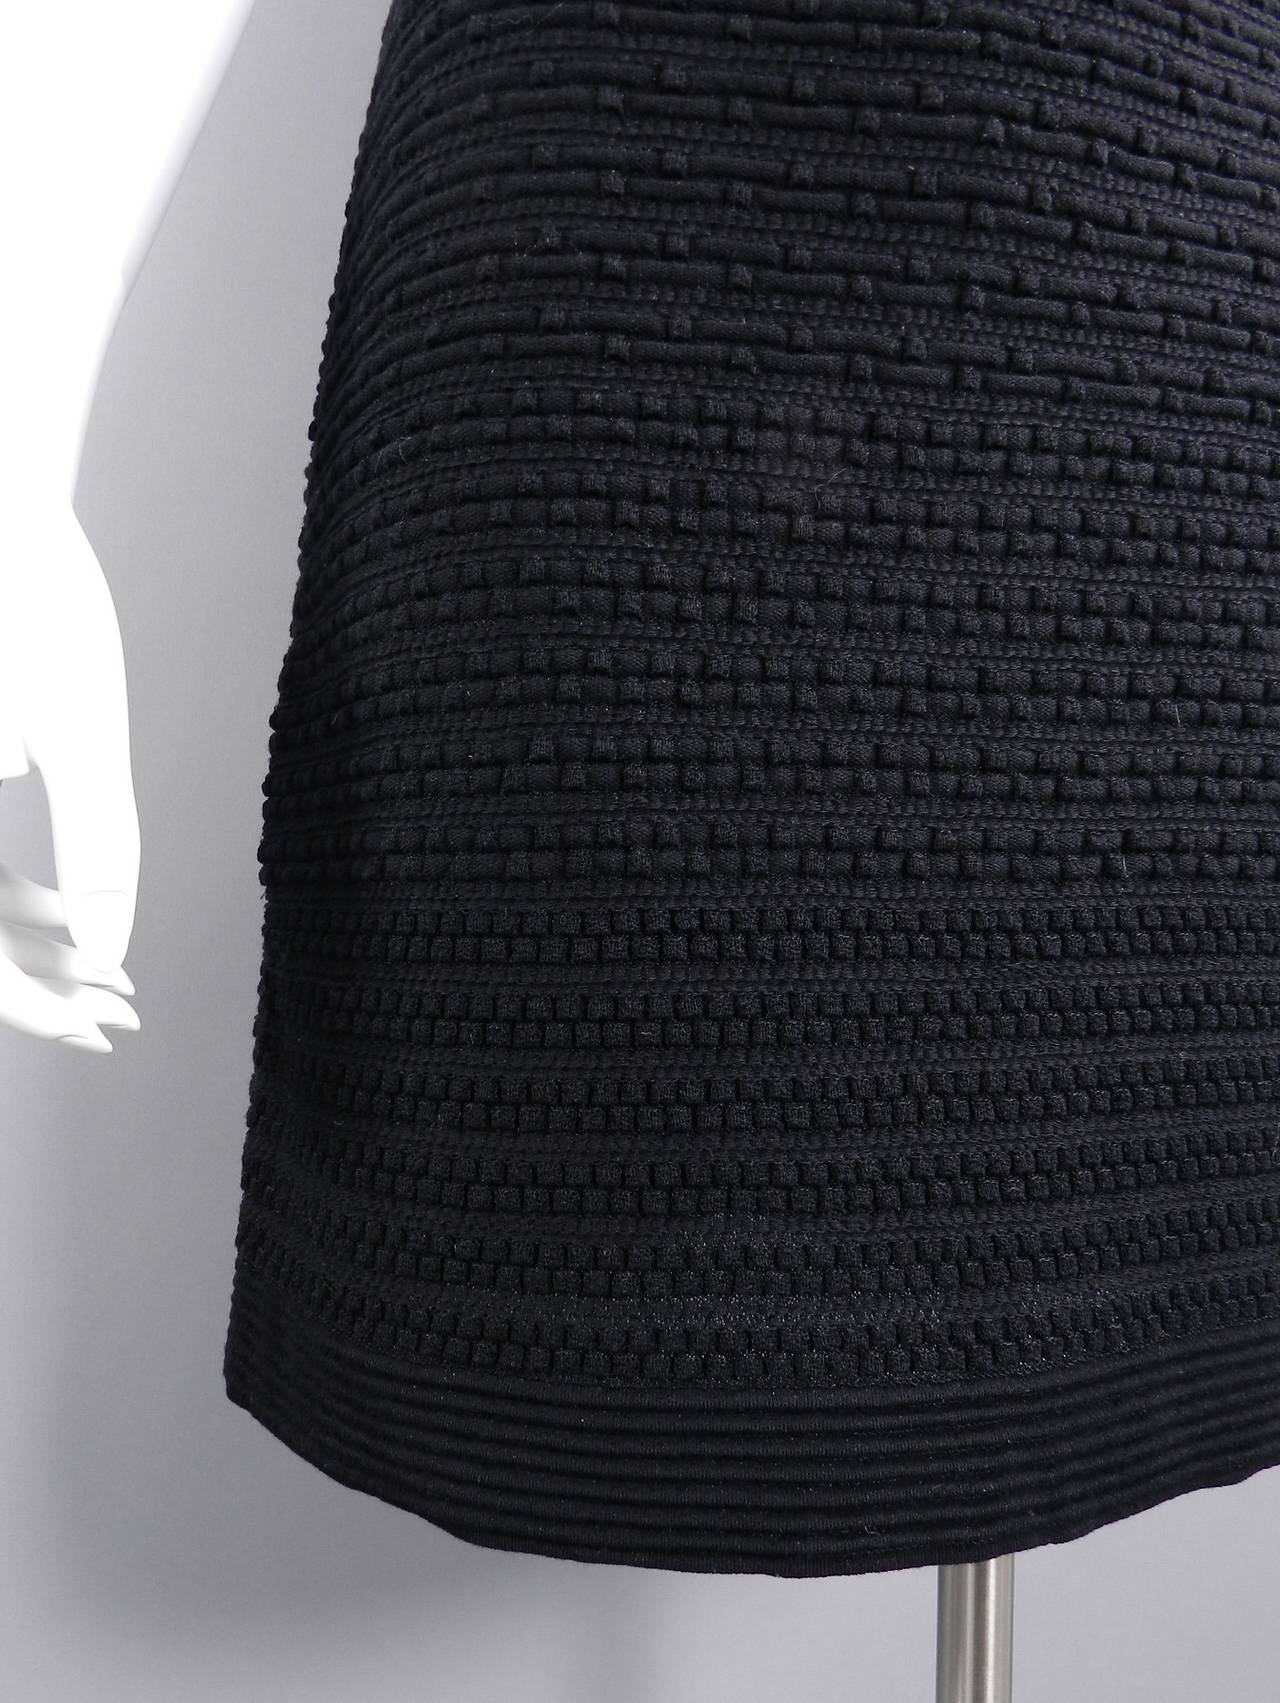 Chanel Black Textured Stretch Jersey Dress with Back Zipper 2